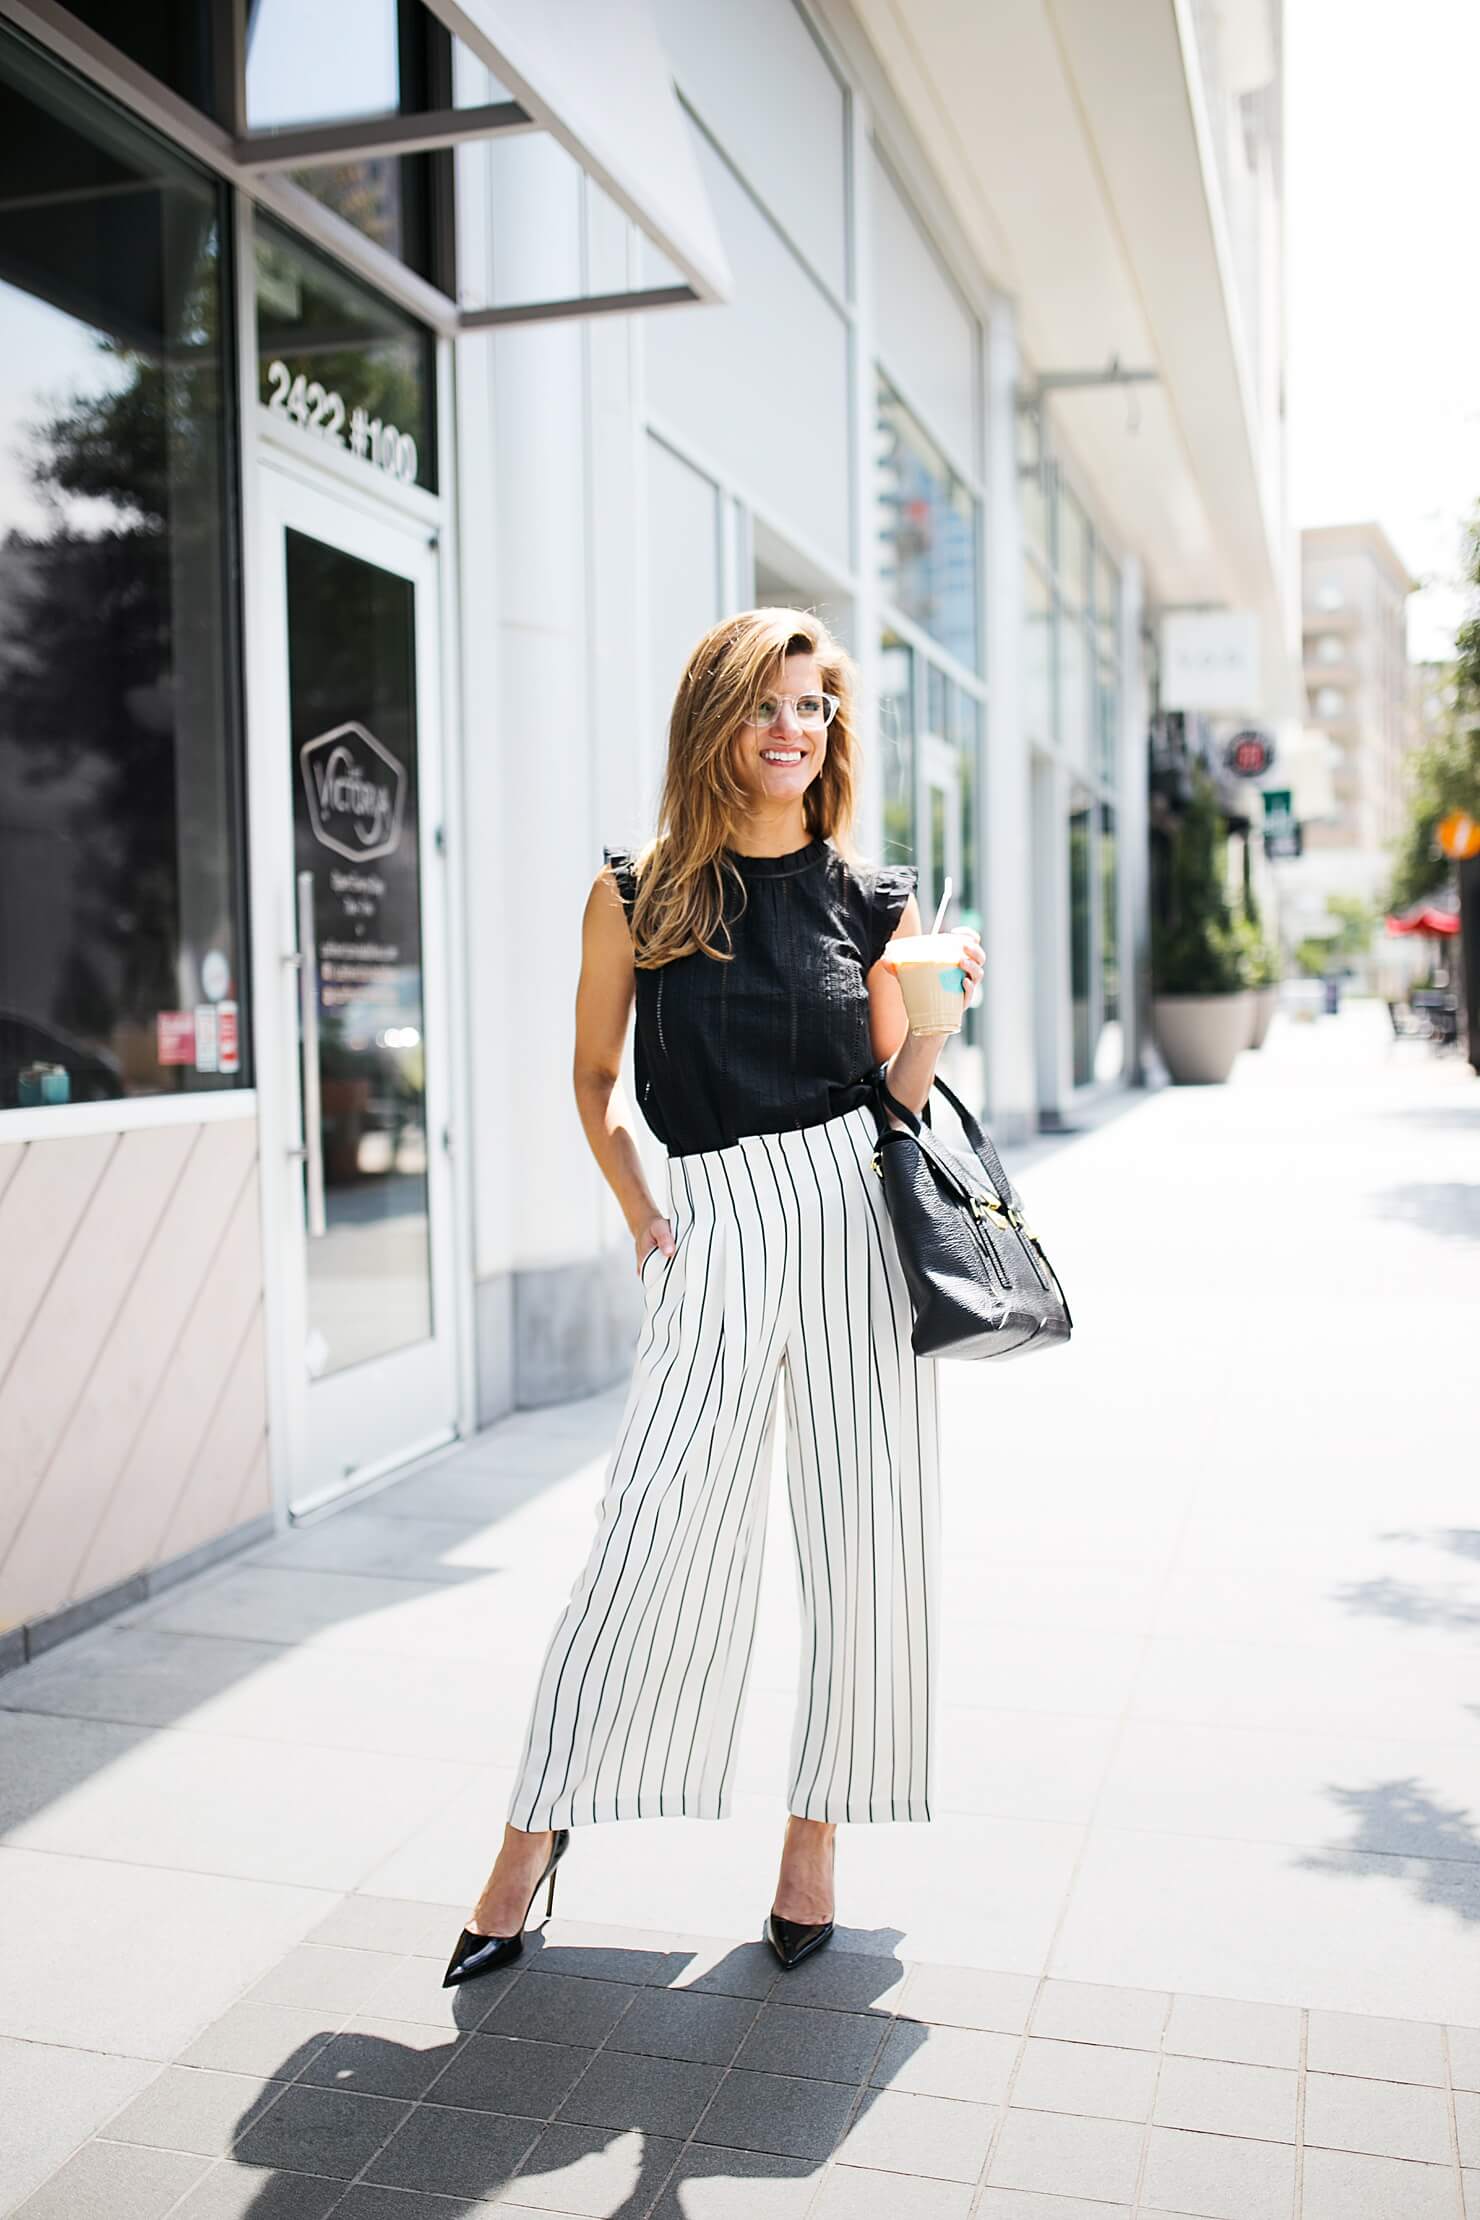 brighton keller wearing eyelet black top with striped culottes, wide leg pants and pumps 